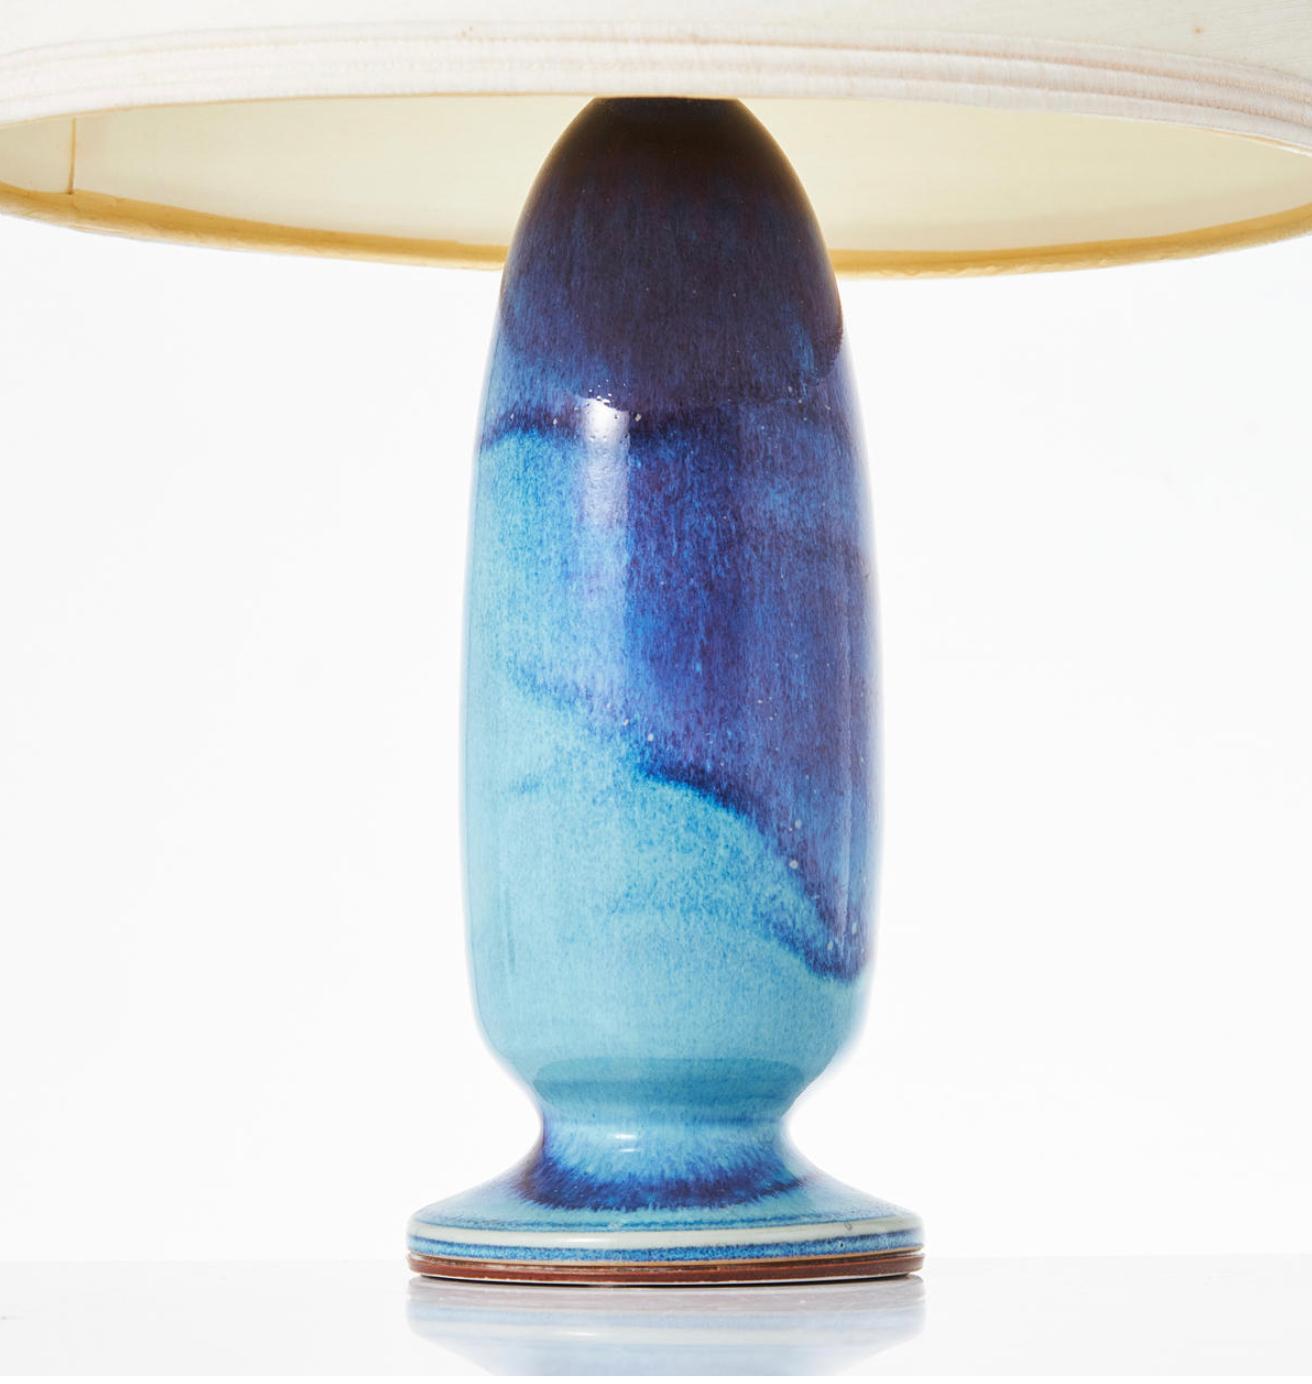 A stoneware table lamp by Berndt Friberg.
Aniaga glazed in turquoise/blue shades, signed Friberg with the studio hand, dated 1974. Total height 19